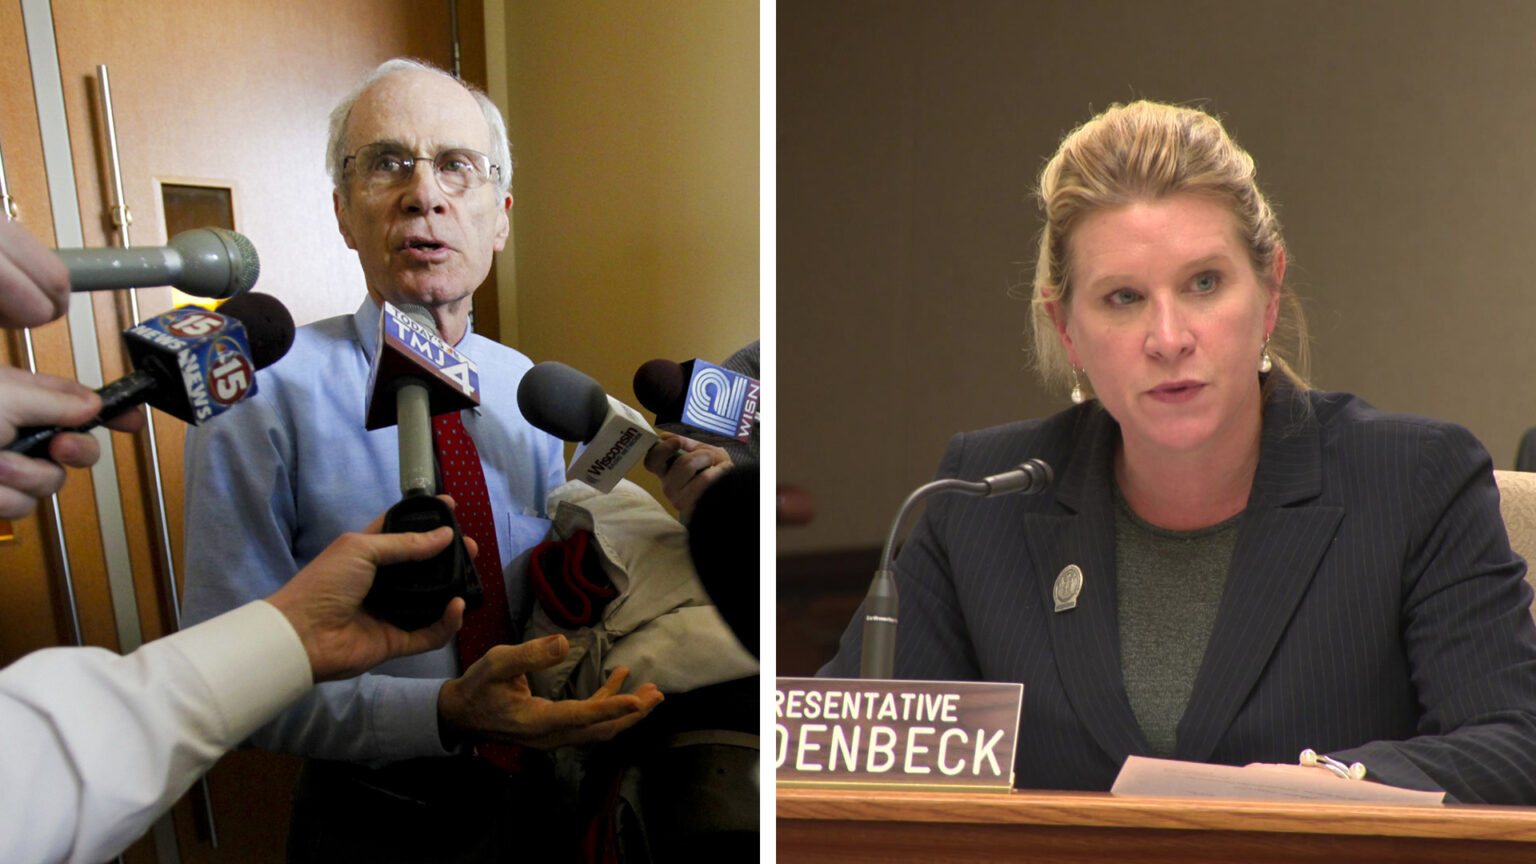 On the left half of a two-part image, Doug La Follette speaks into a half-dozen microphones held by reporters in front of a door. On the right half of the image, Amy Loudenbeck speaks into a microphone while seated in a legislative meeting room.